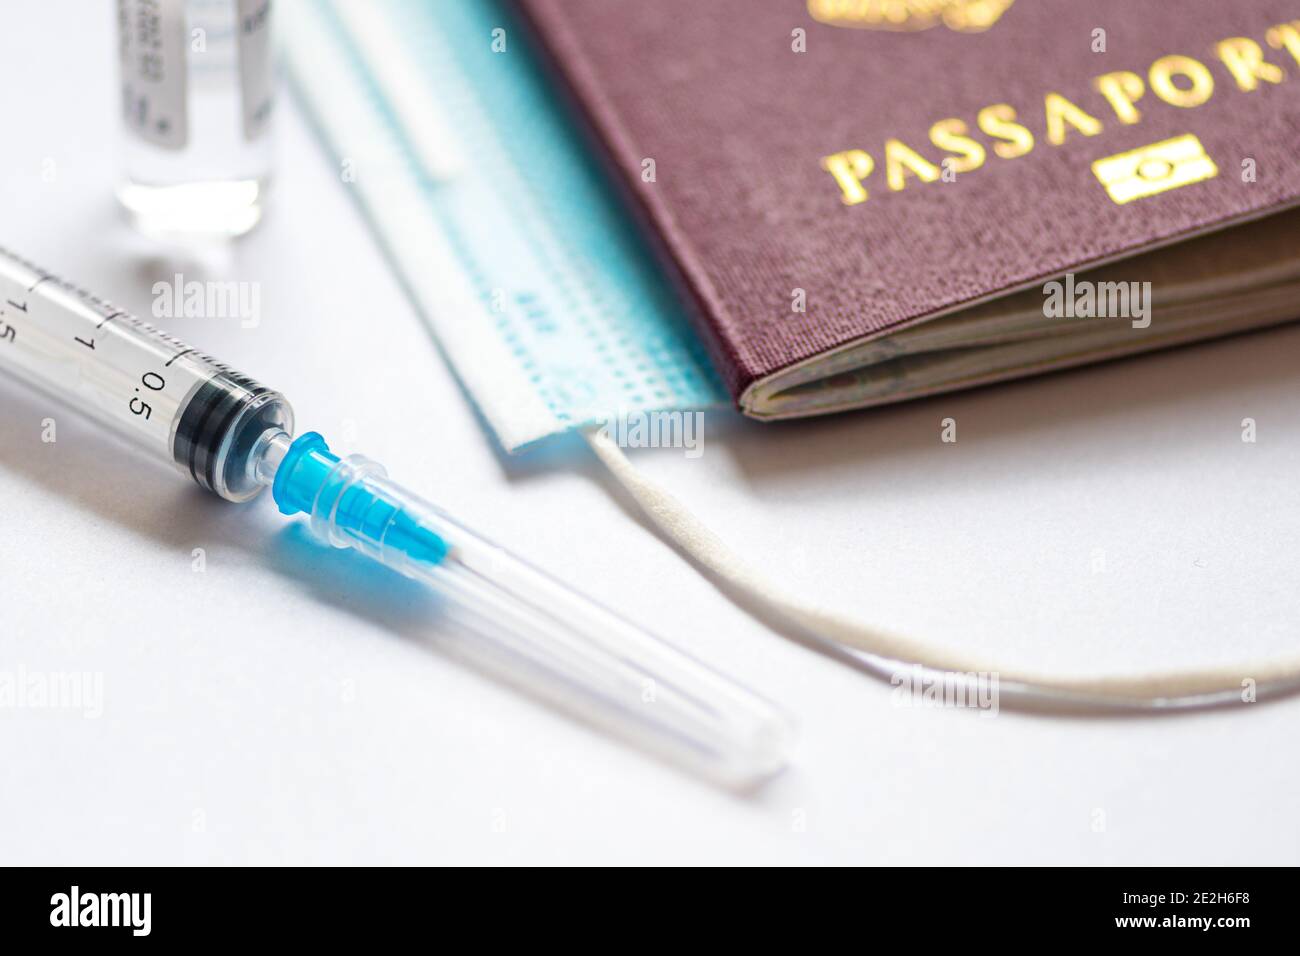 Syringe with needle, vial or phial, surgical face mask and passport or visa on a white table ready to be used. Covid or Coronavirus vaccine background Stock Photo